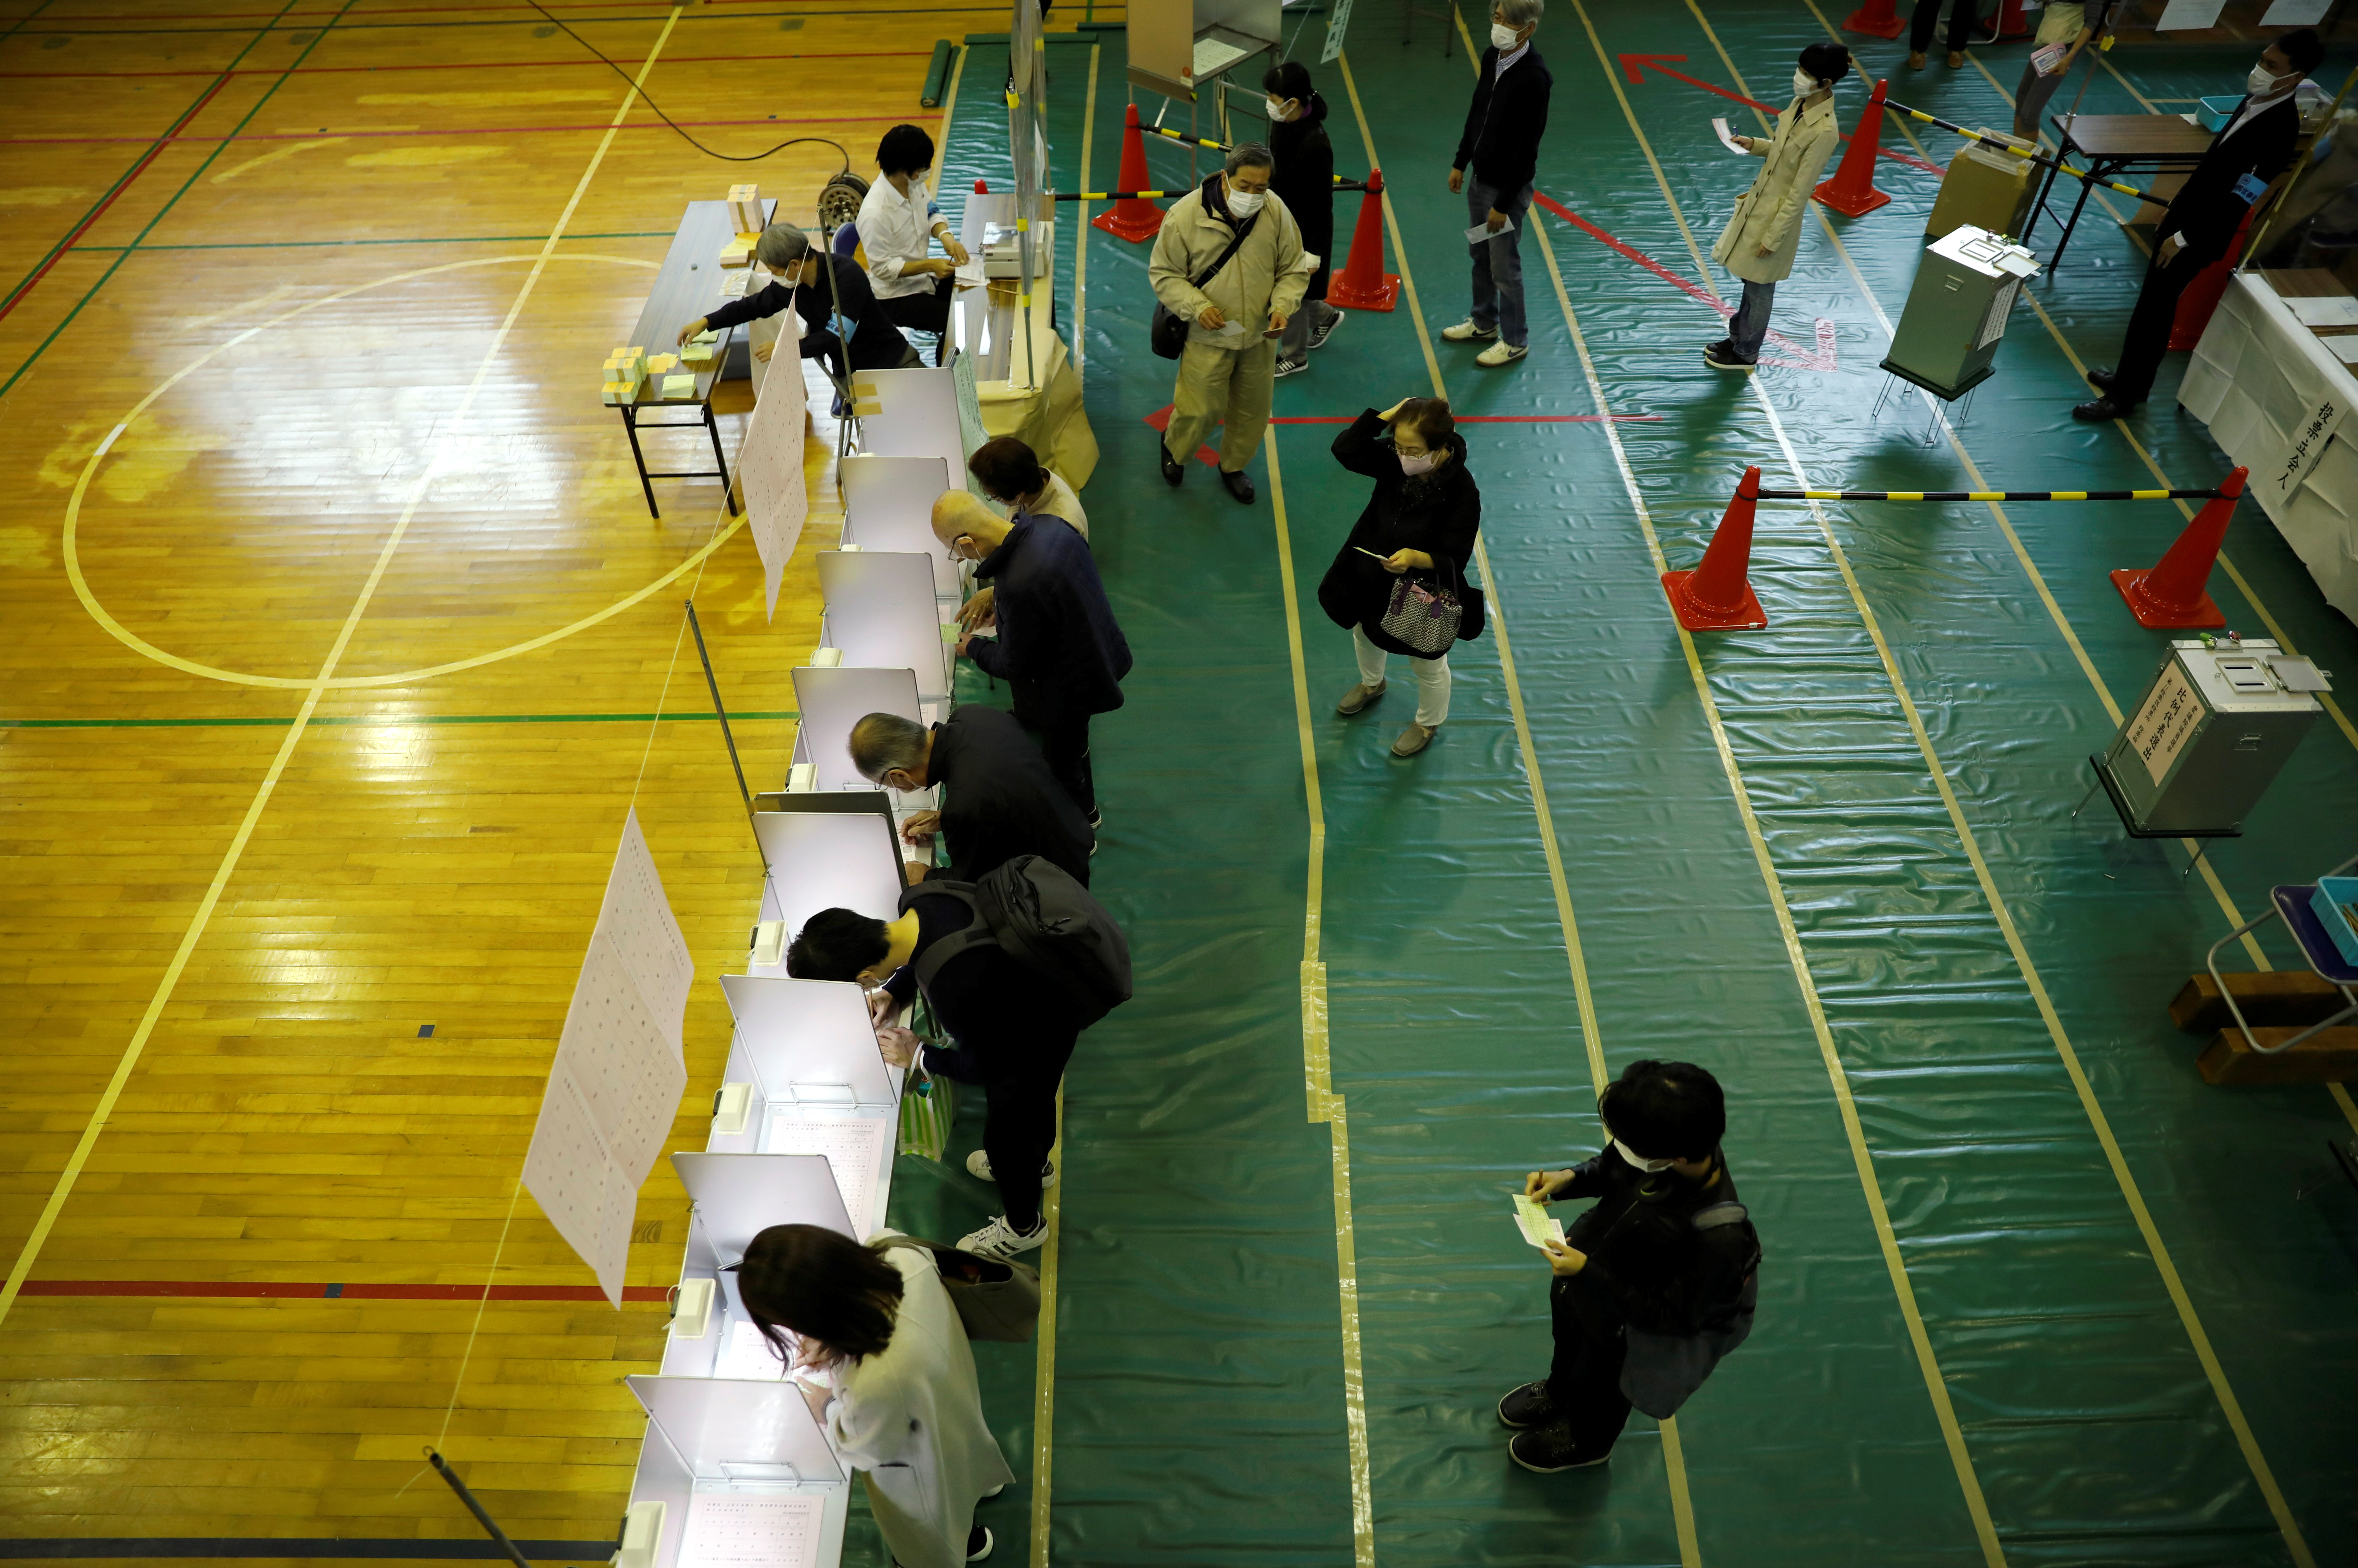 A voter casts a ballot in the lower house election at a polling station, amid the coronavirus disease (COVID-19) pandemic, in Tokyo